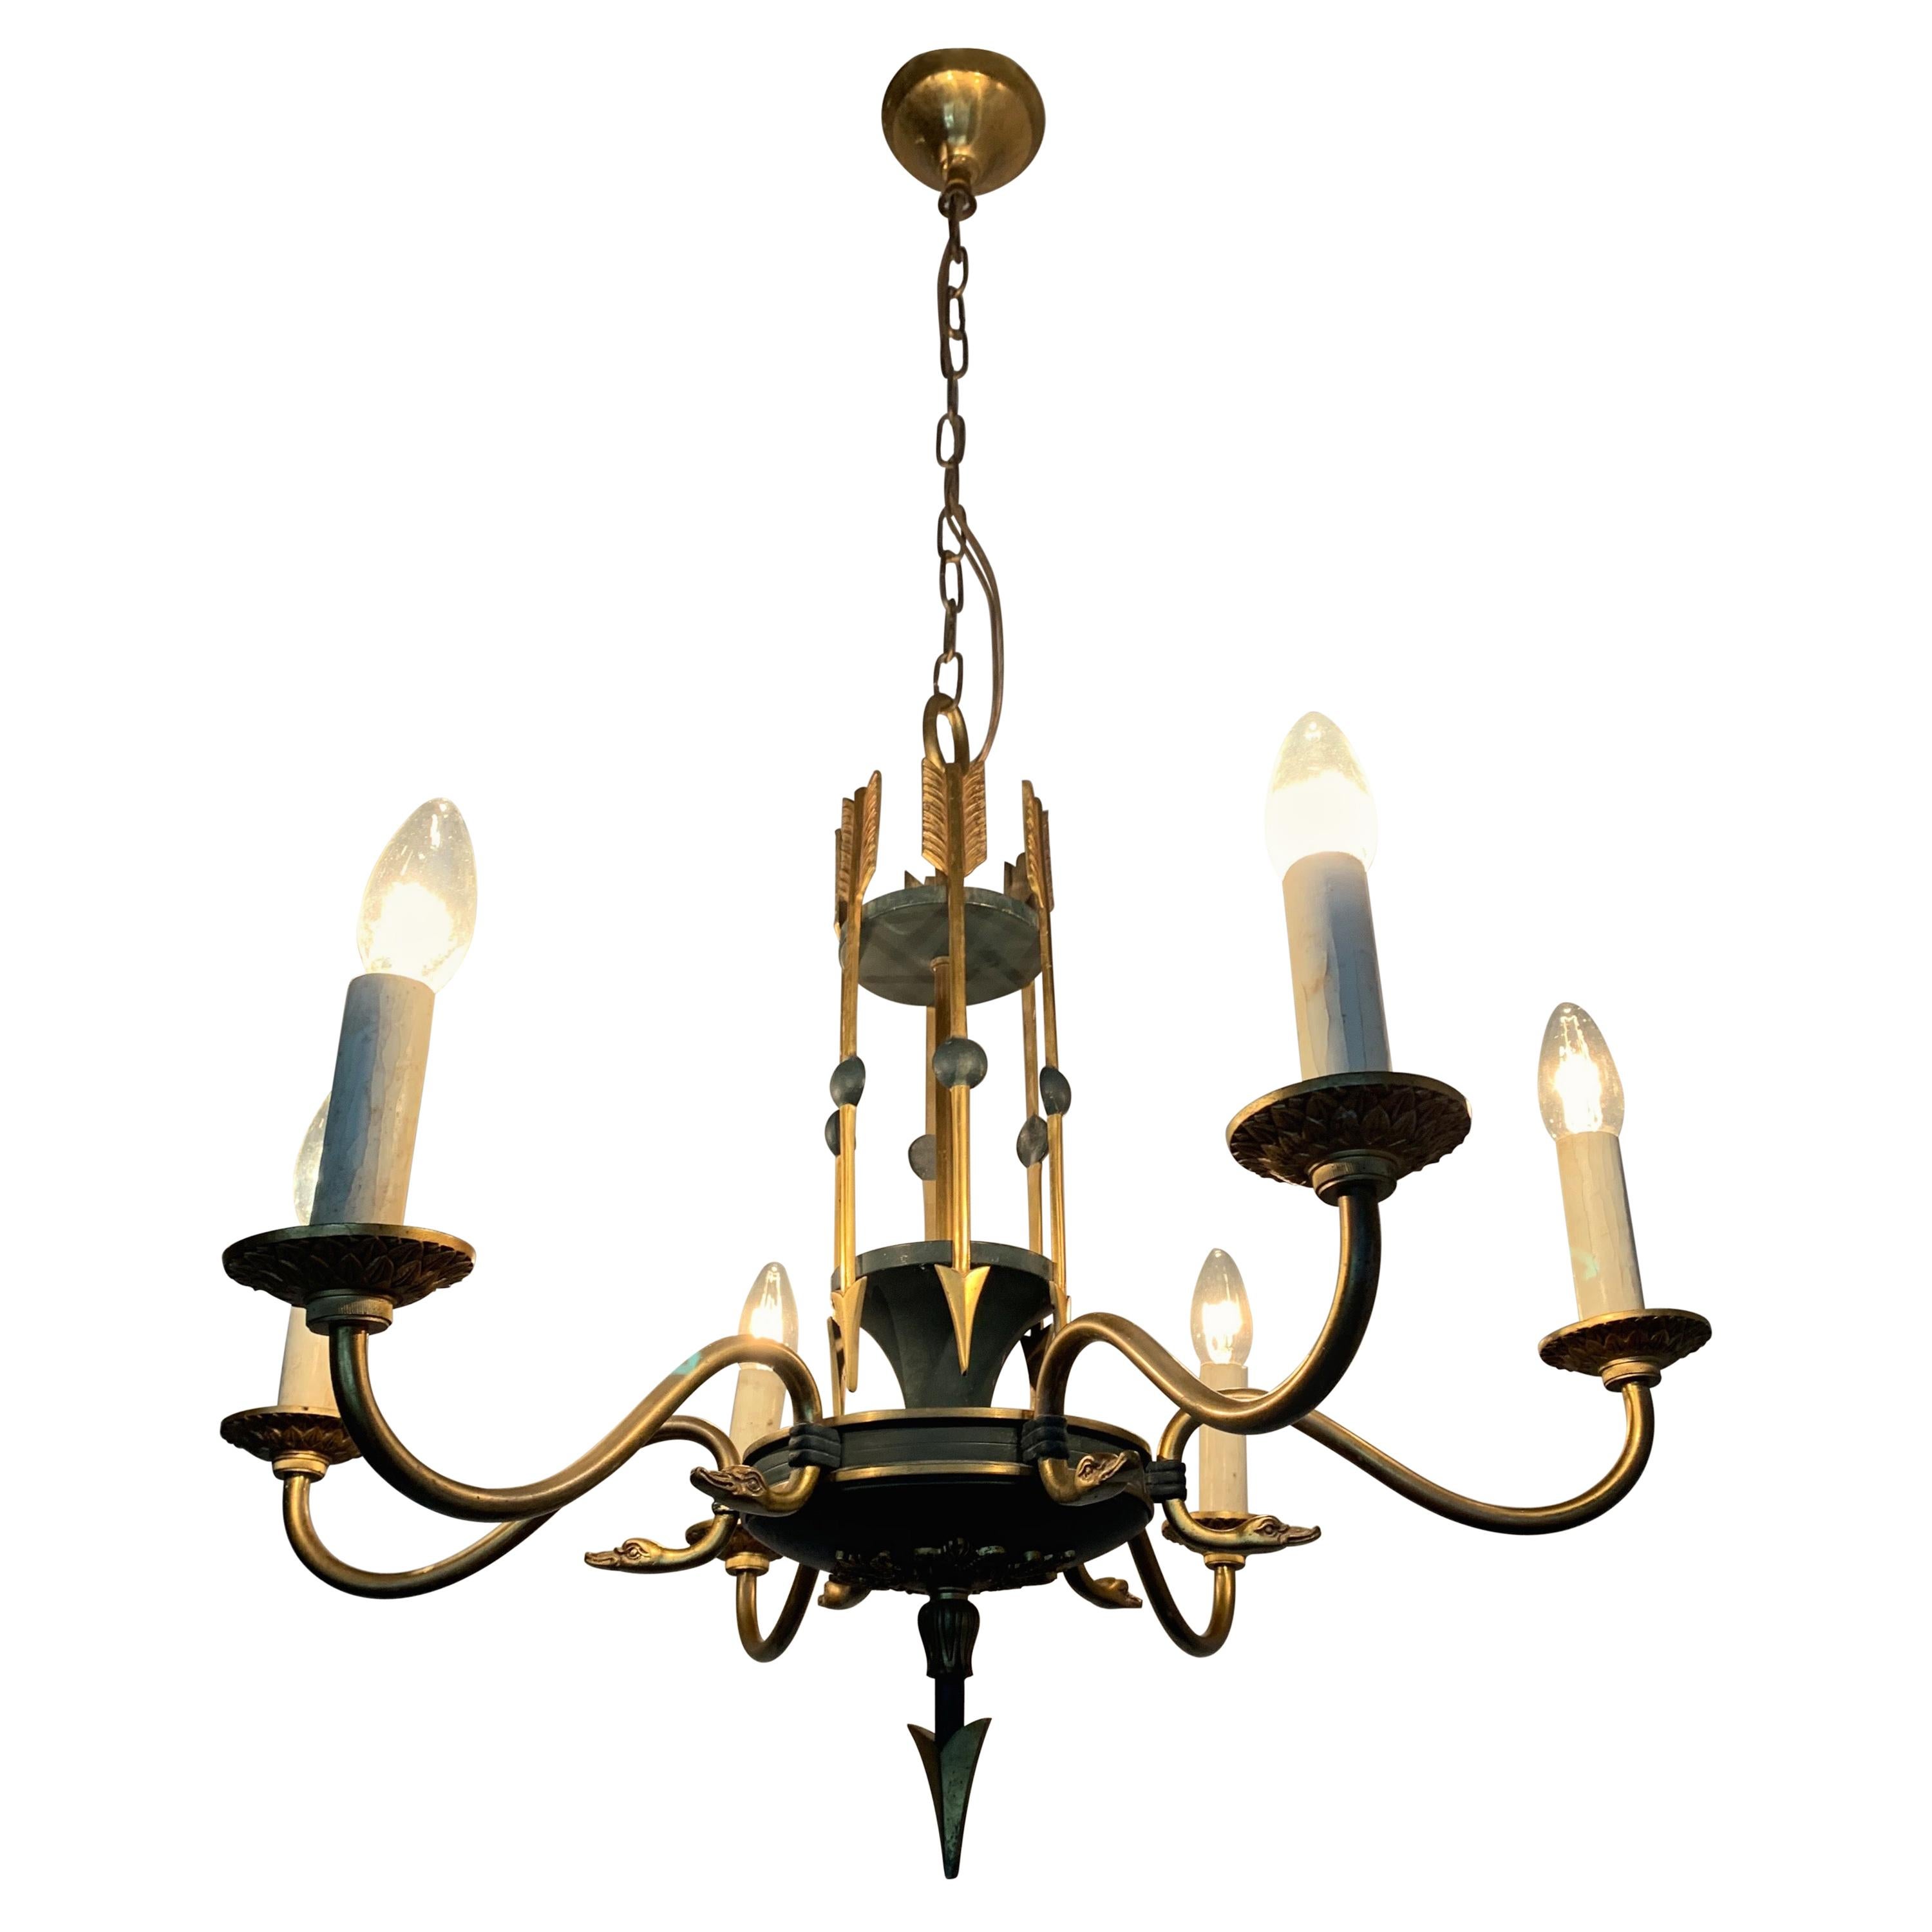 Stylish Empire Revival Six-Light Pendant Chandelier with Swan Heads and Arrows